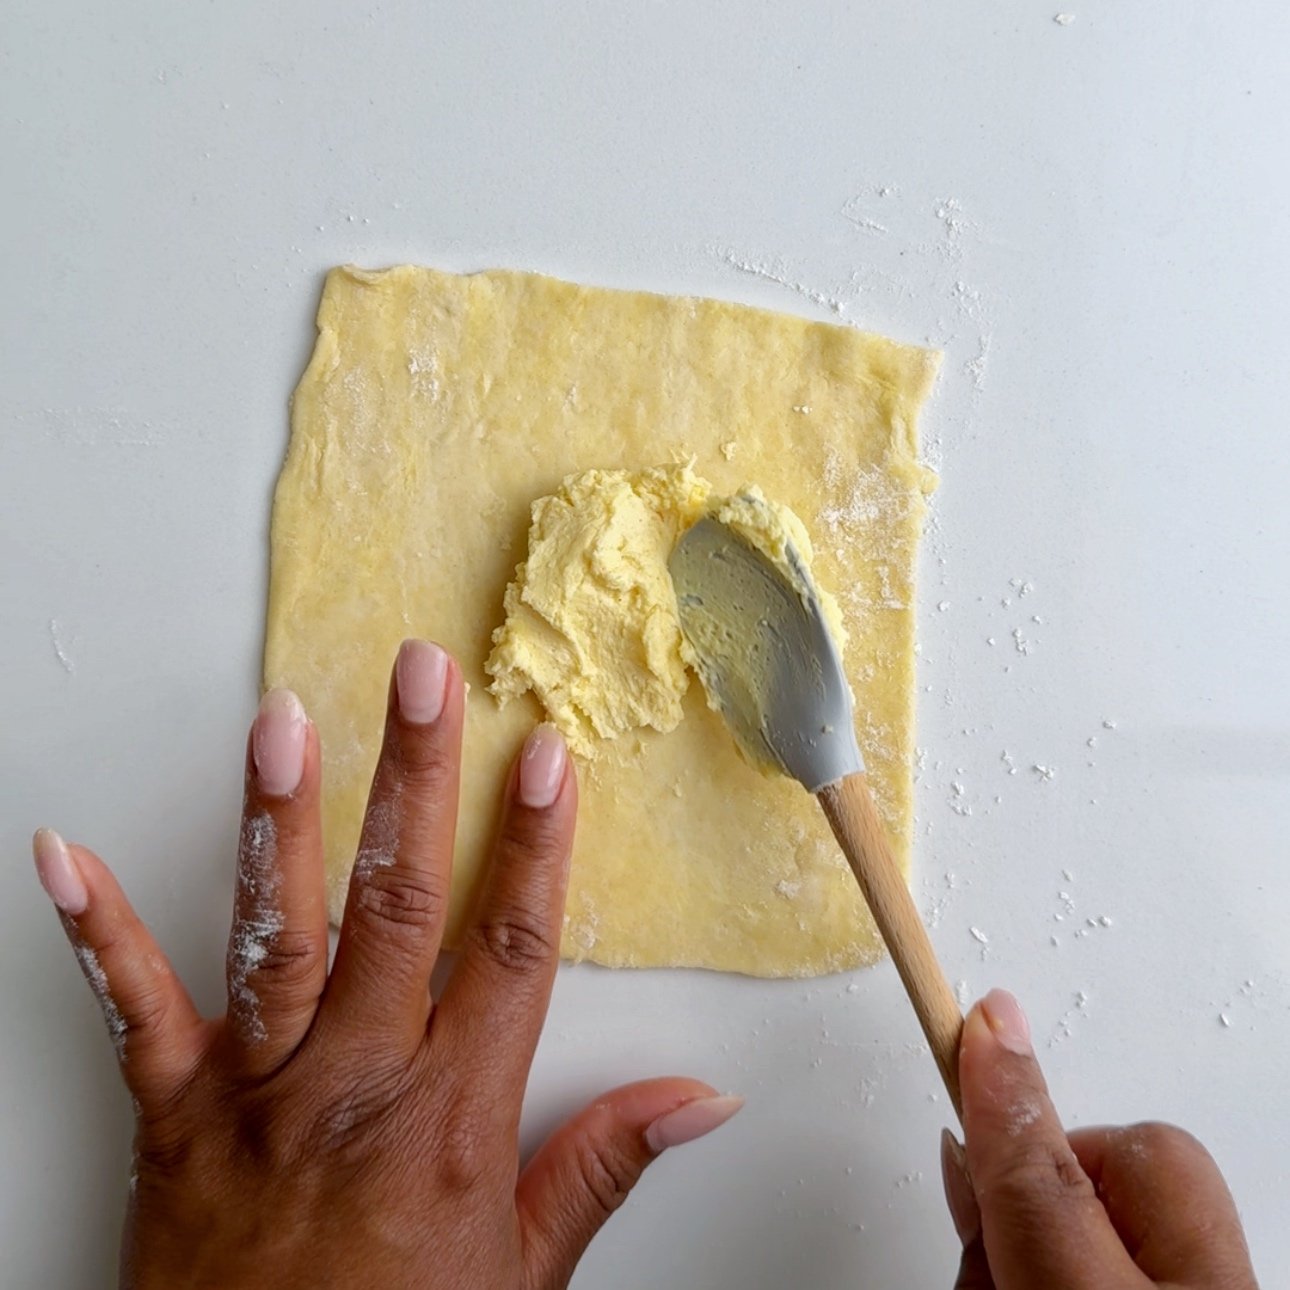 Adding the cheese filling to cheeserolls